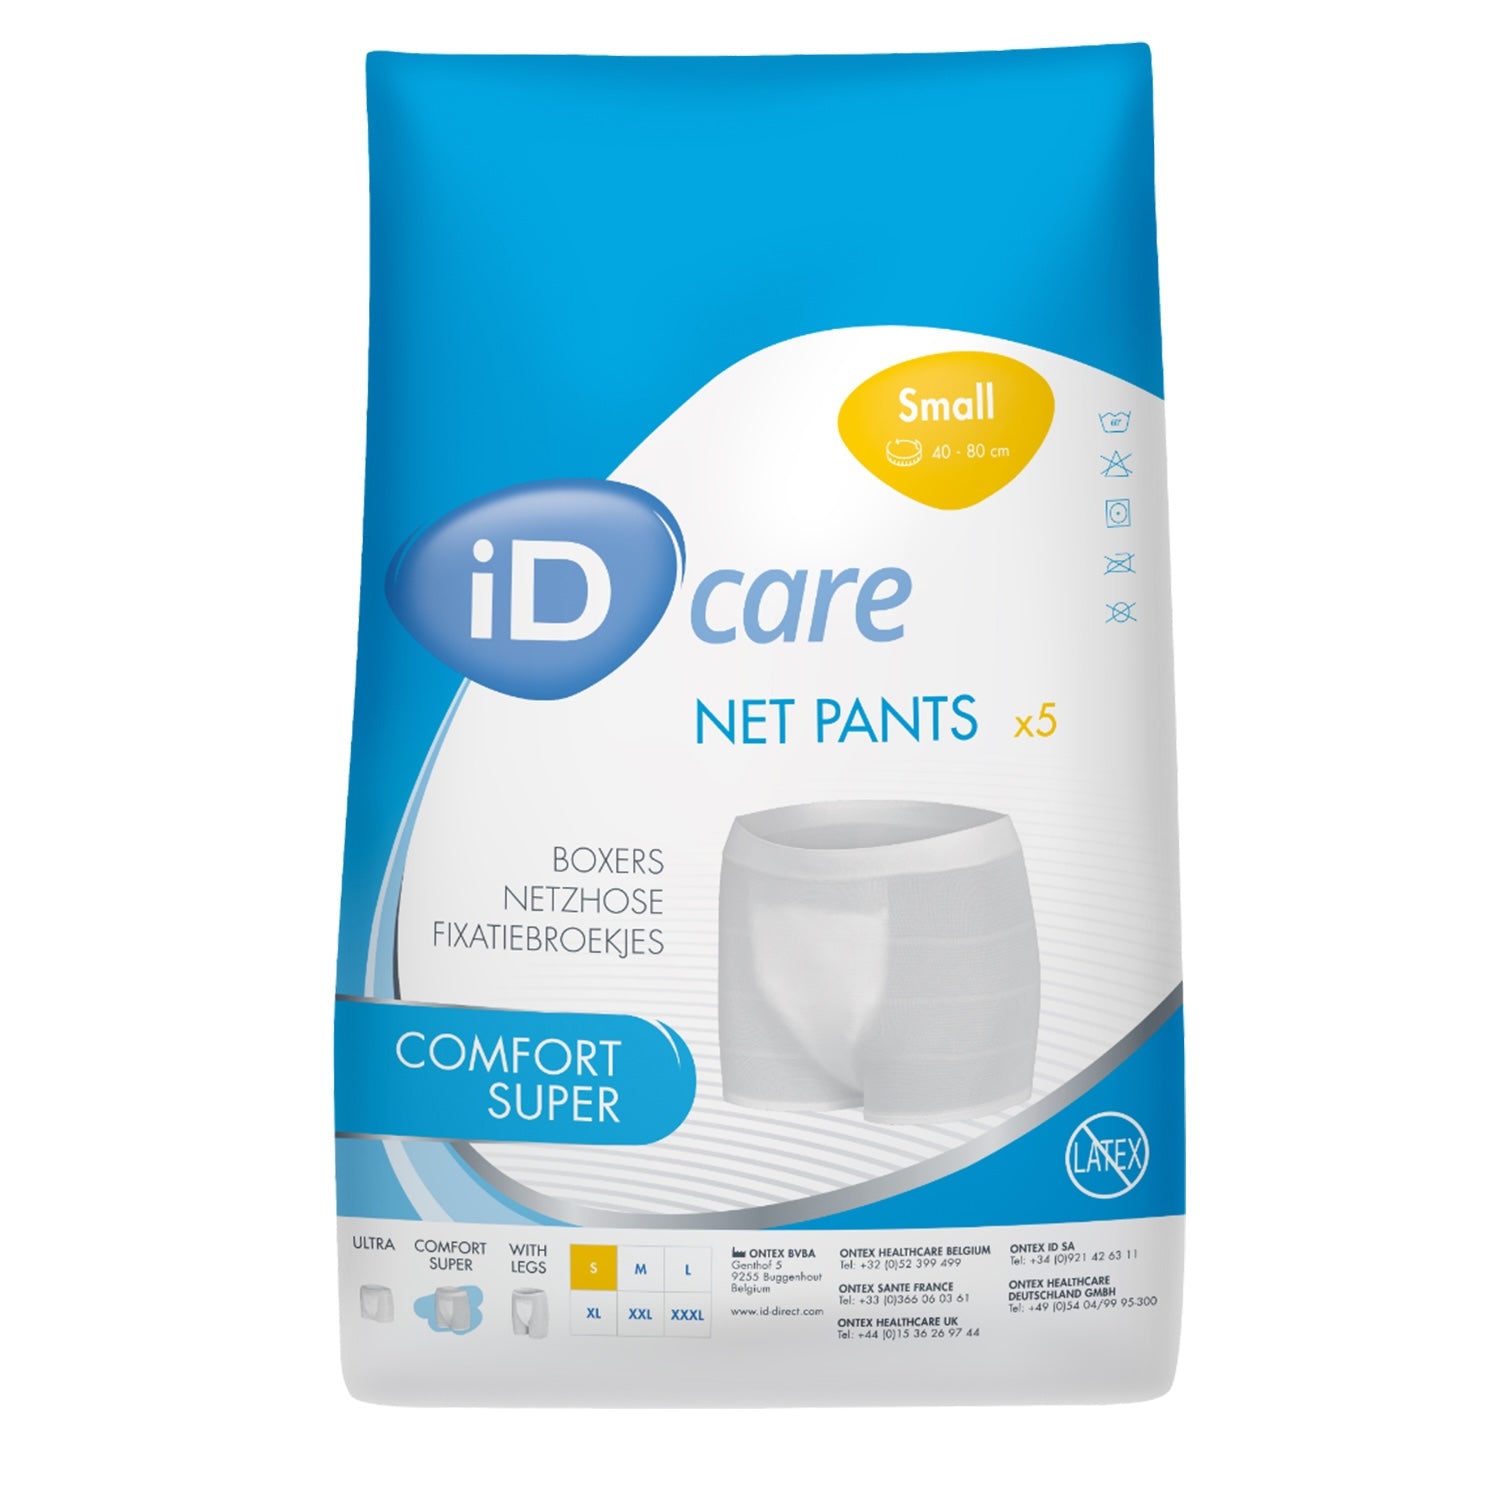 iD Care Net Pants Comfort Super | Small | Pack of 5